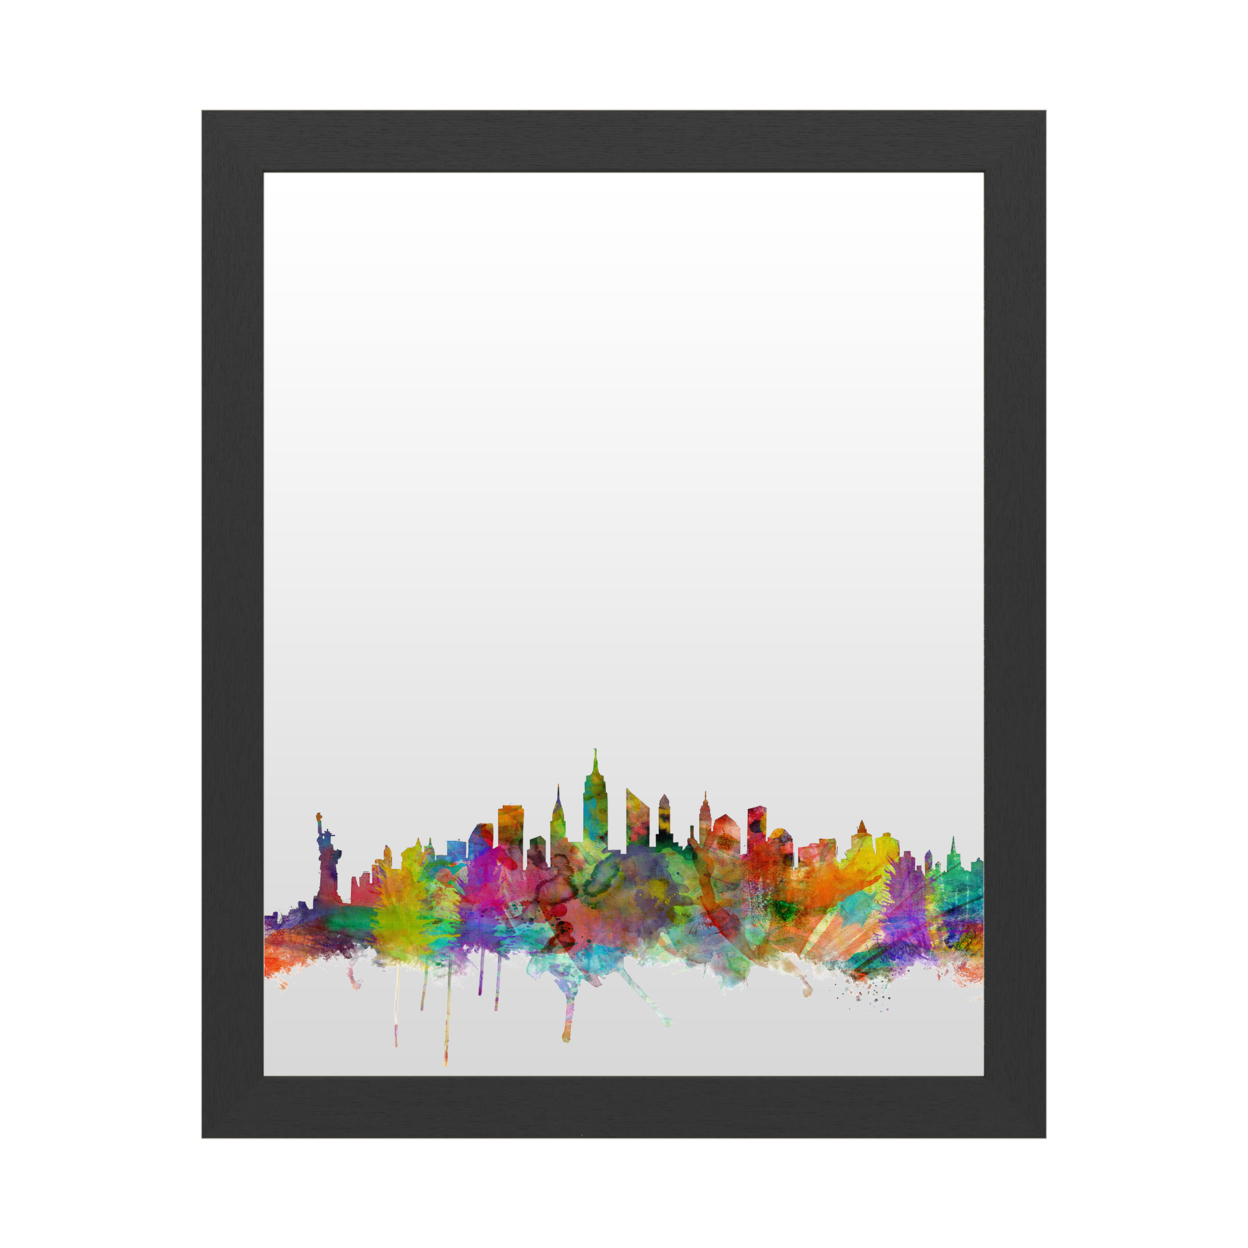 Dry Erase 16 X 20 Marker Board With Printed Artwork - Michael Tompsett New York City Skyline White Board - Ready To Hang